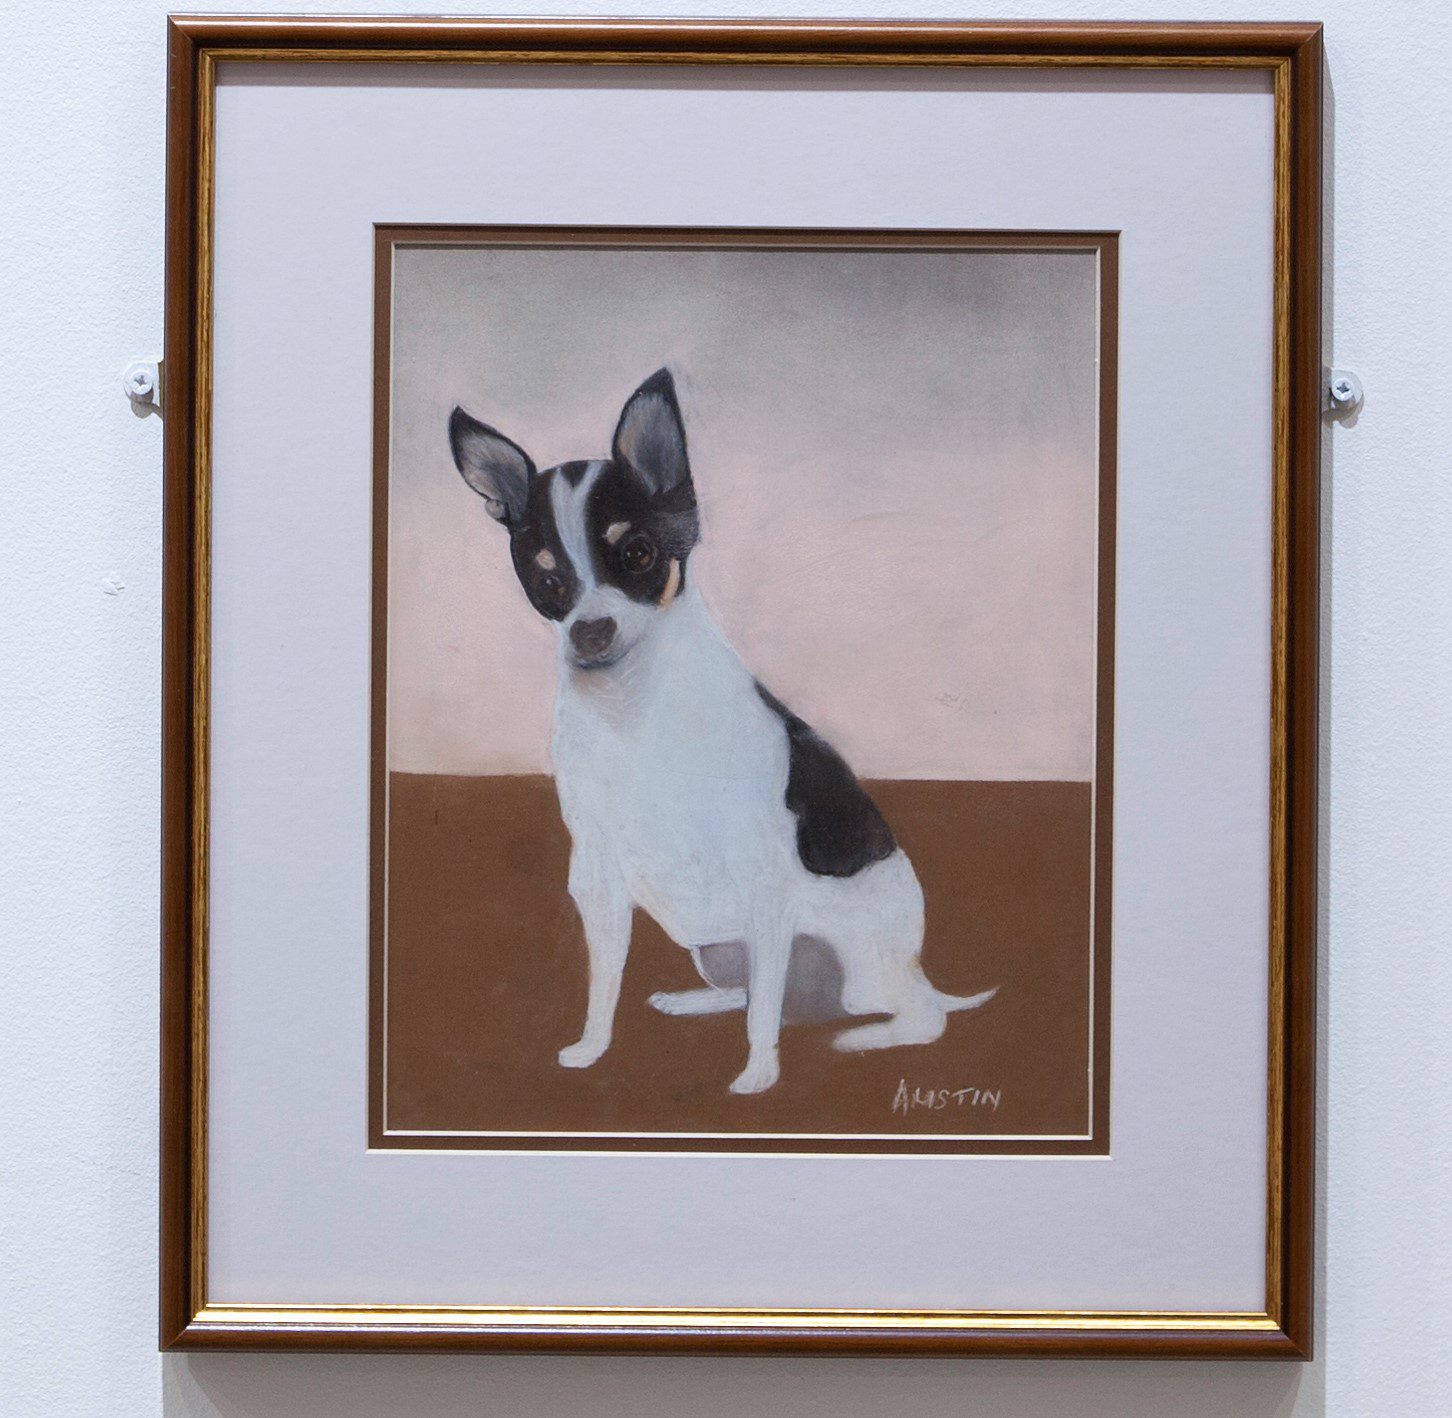 How this pup stole the show at Tŷ Pawb’s art exhibition